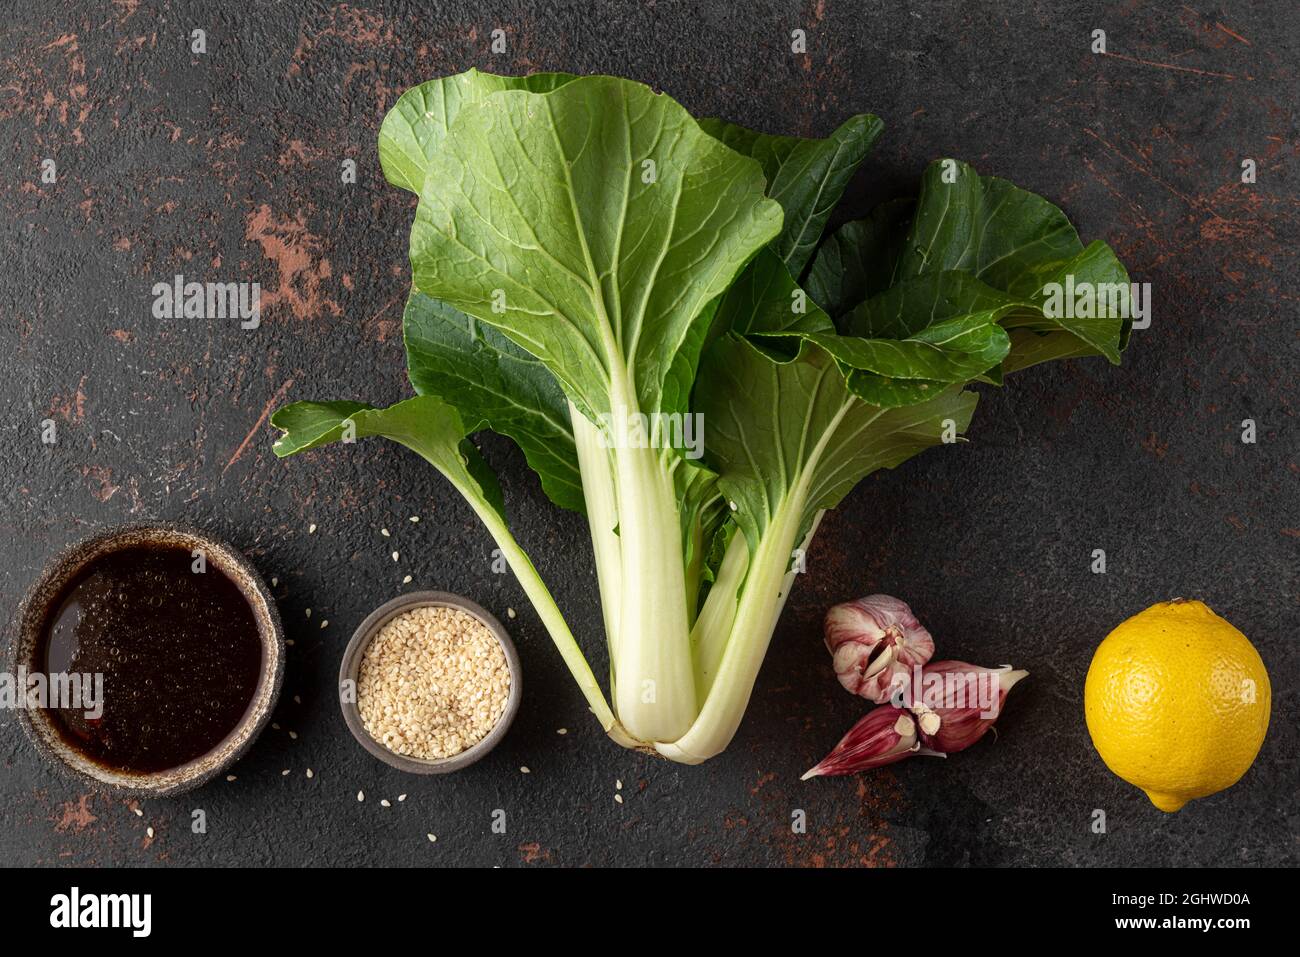 Asian food cooking concept. Fresh harvested organic bok choy chinese cabbage with ingredients on black background. Top view Stock Photo